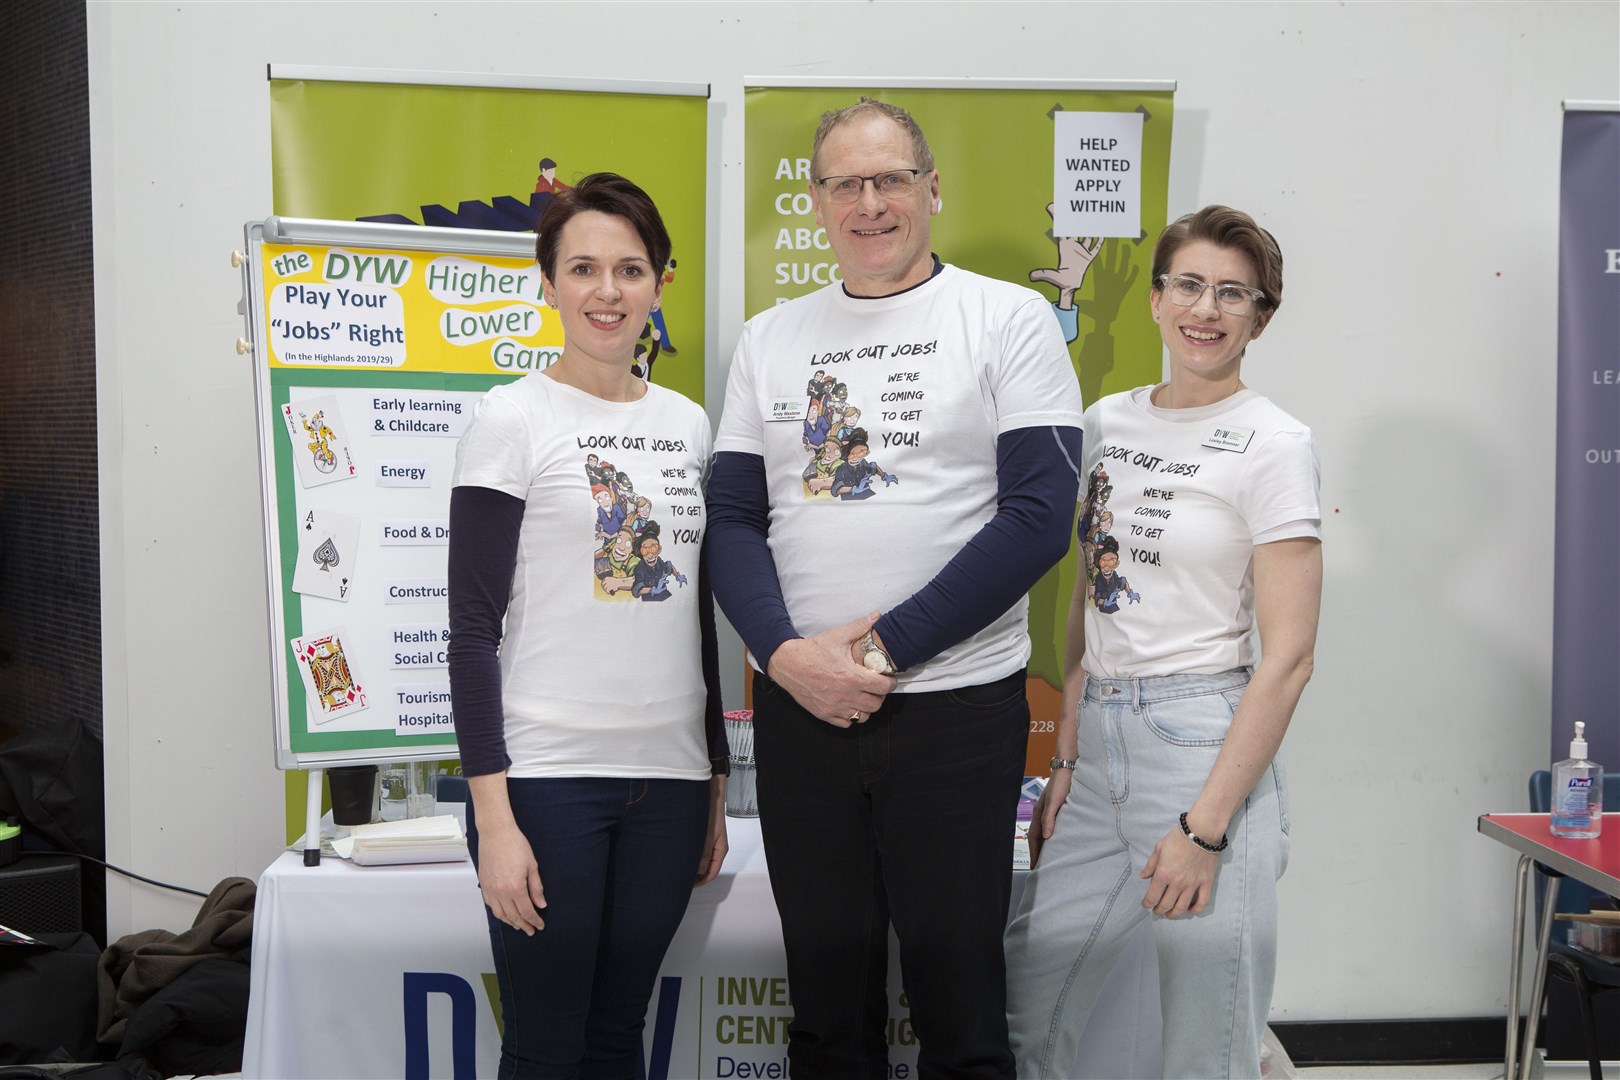 Eilidh Edgar, Andy Maxtone and Lesley Bremner representing DYW.